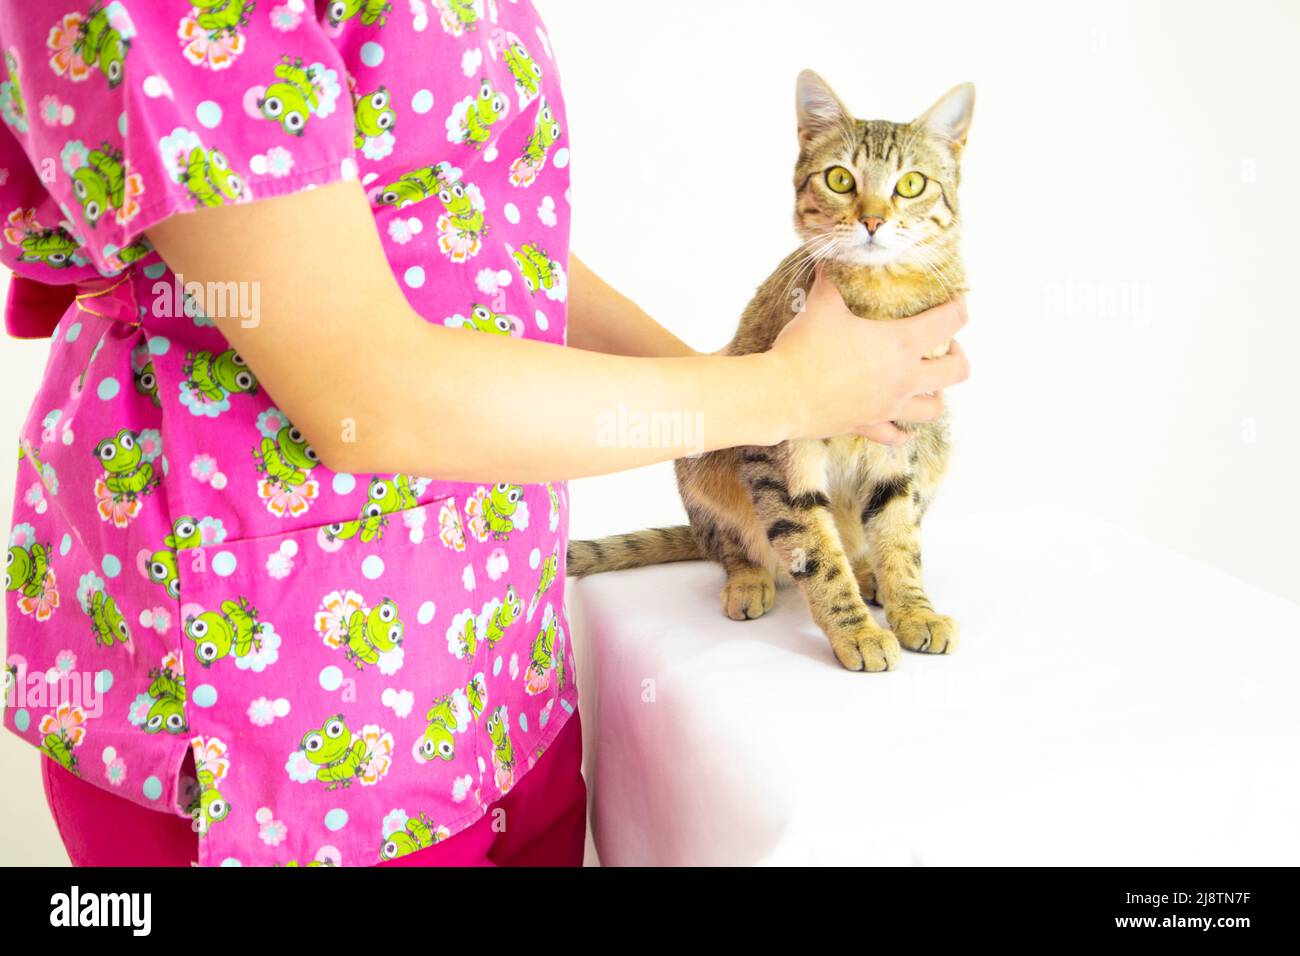 beautiful woman veterinary doctor wearing pink uniform and pink surgical cap, checking cute kitten on white background Stock Photo